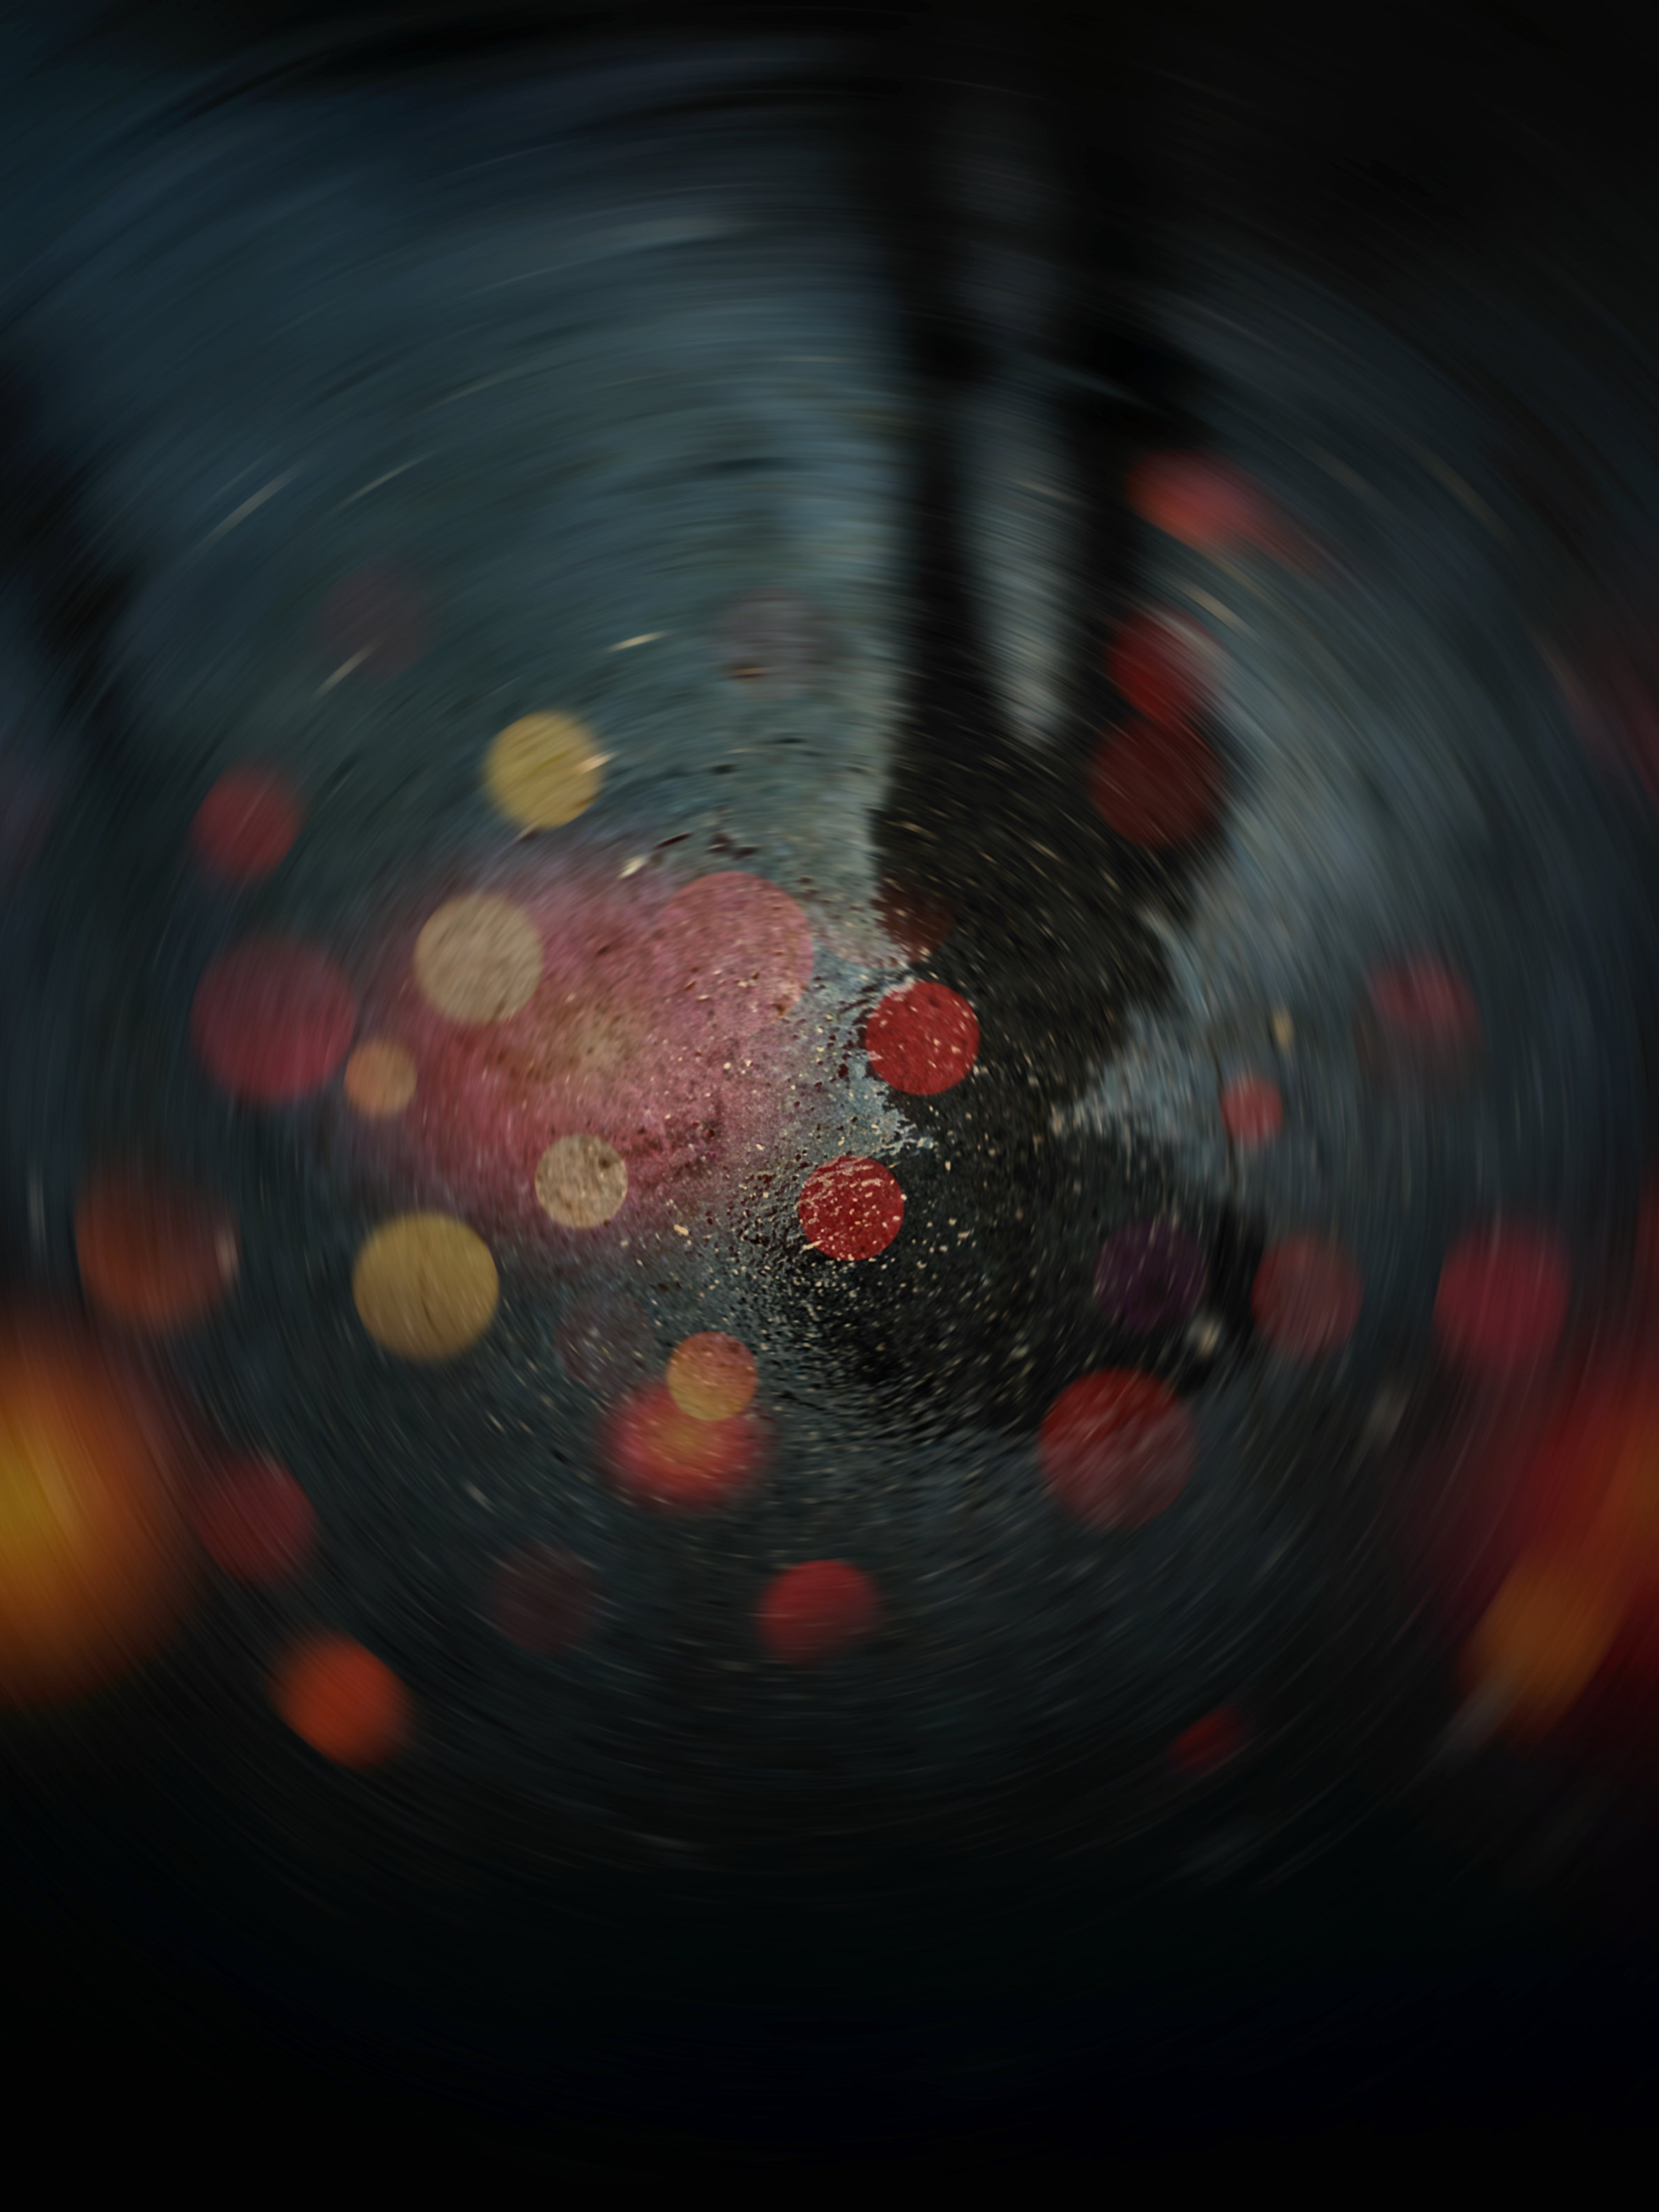 134086 download wallpaper blur, reflection, miscellanea, miscellaneous, wet, smooth, focus, bokeh, boquet, effect screensavers and pictures for free